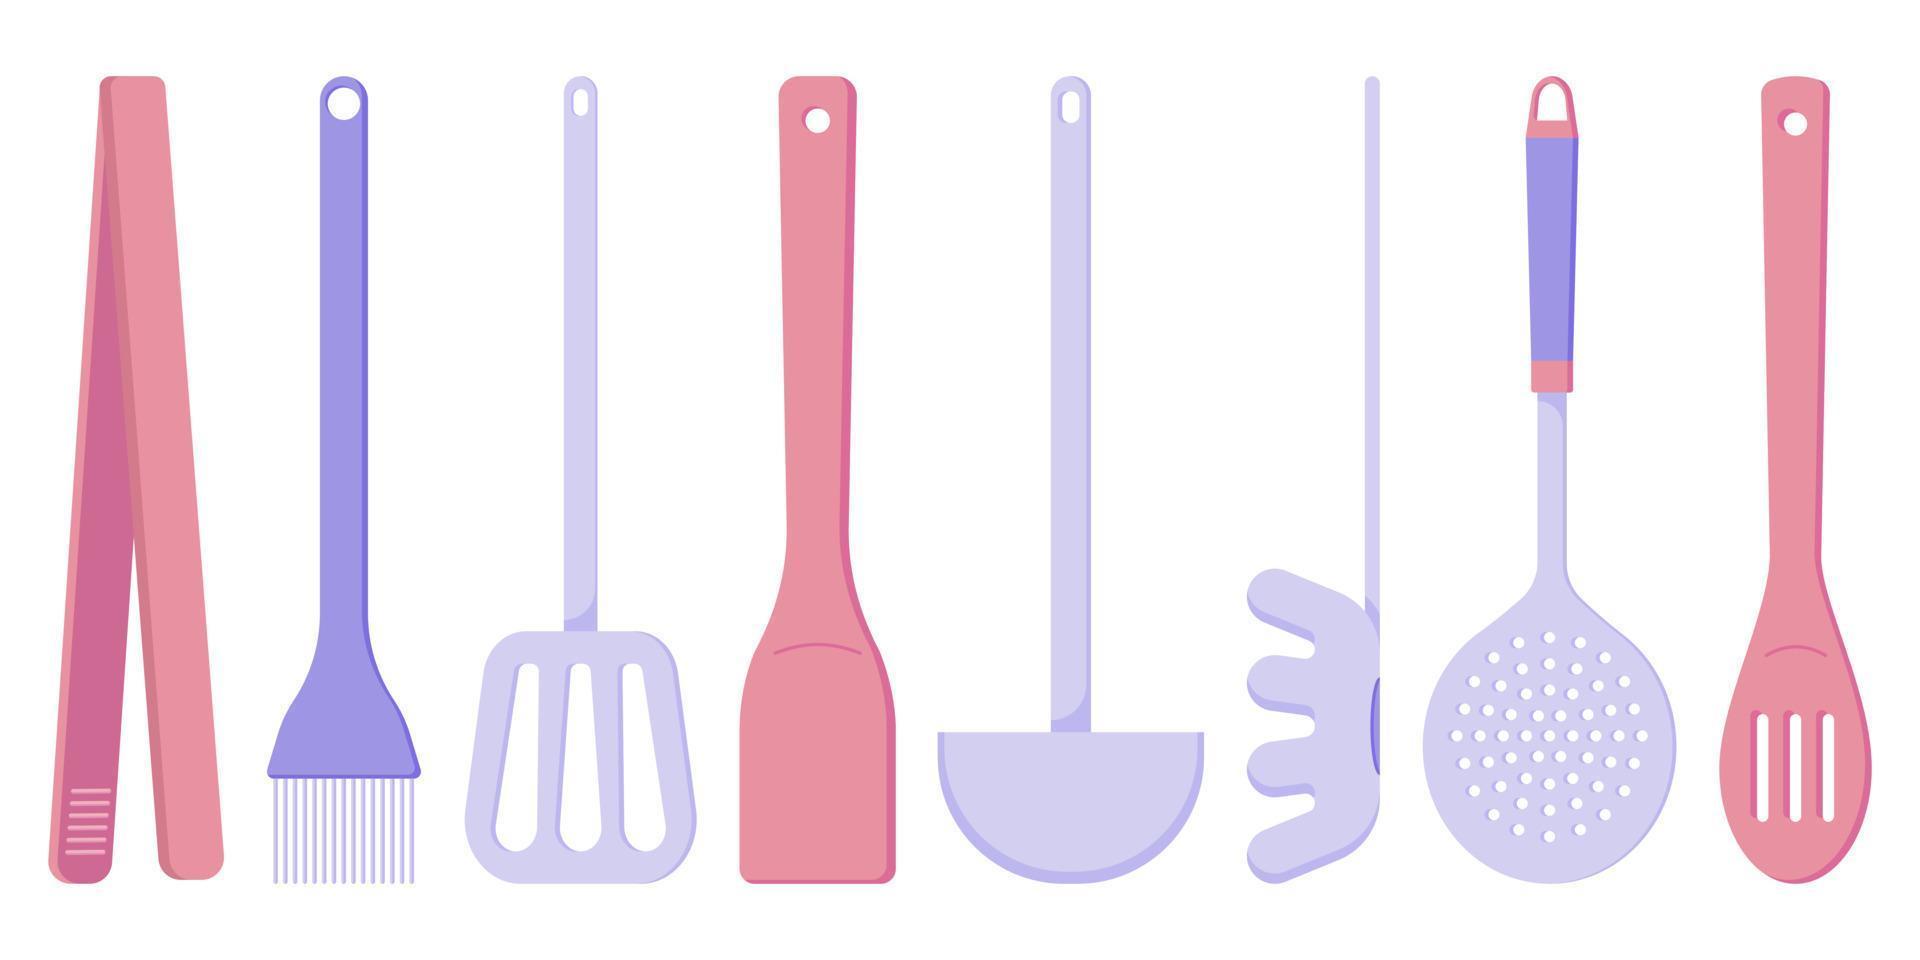 Set of kitchen appliances for cooking, a spoon, a skimmer, a wooden spatula, a ladle, kitchen tongs, a grill brush, a spaghetti spoon, a flat style illustration vector